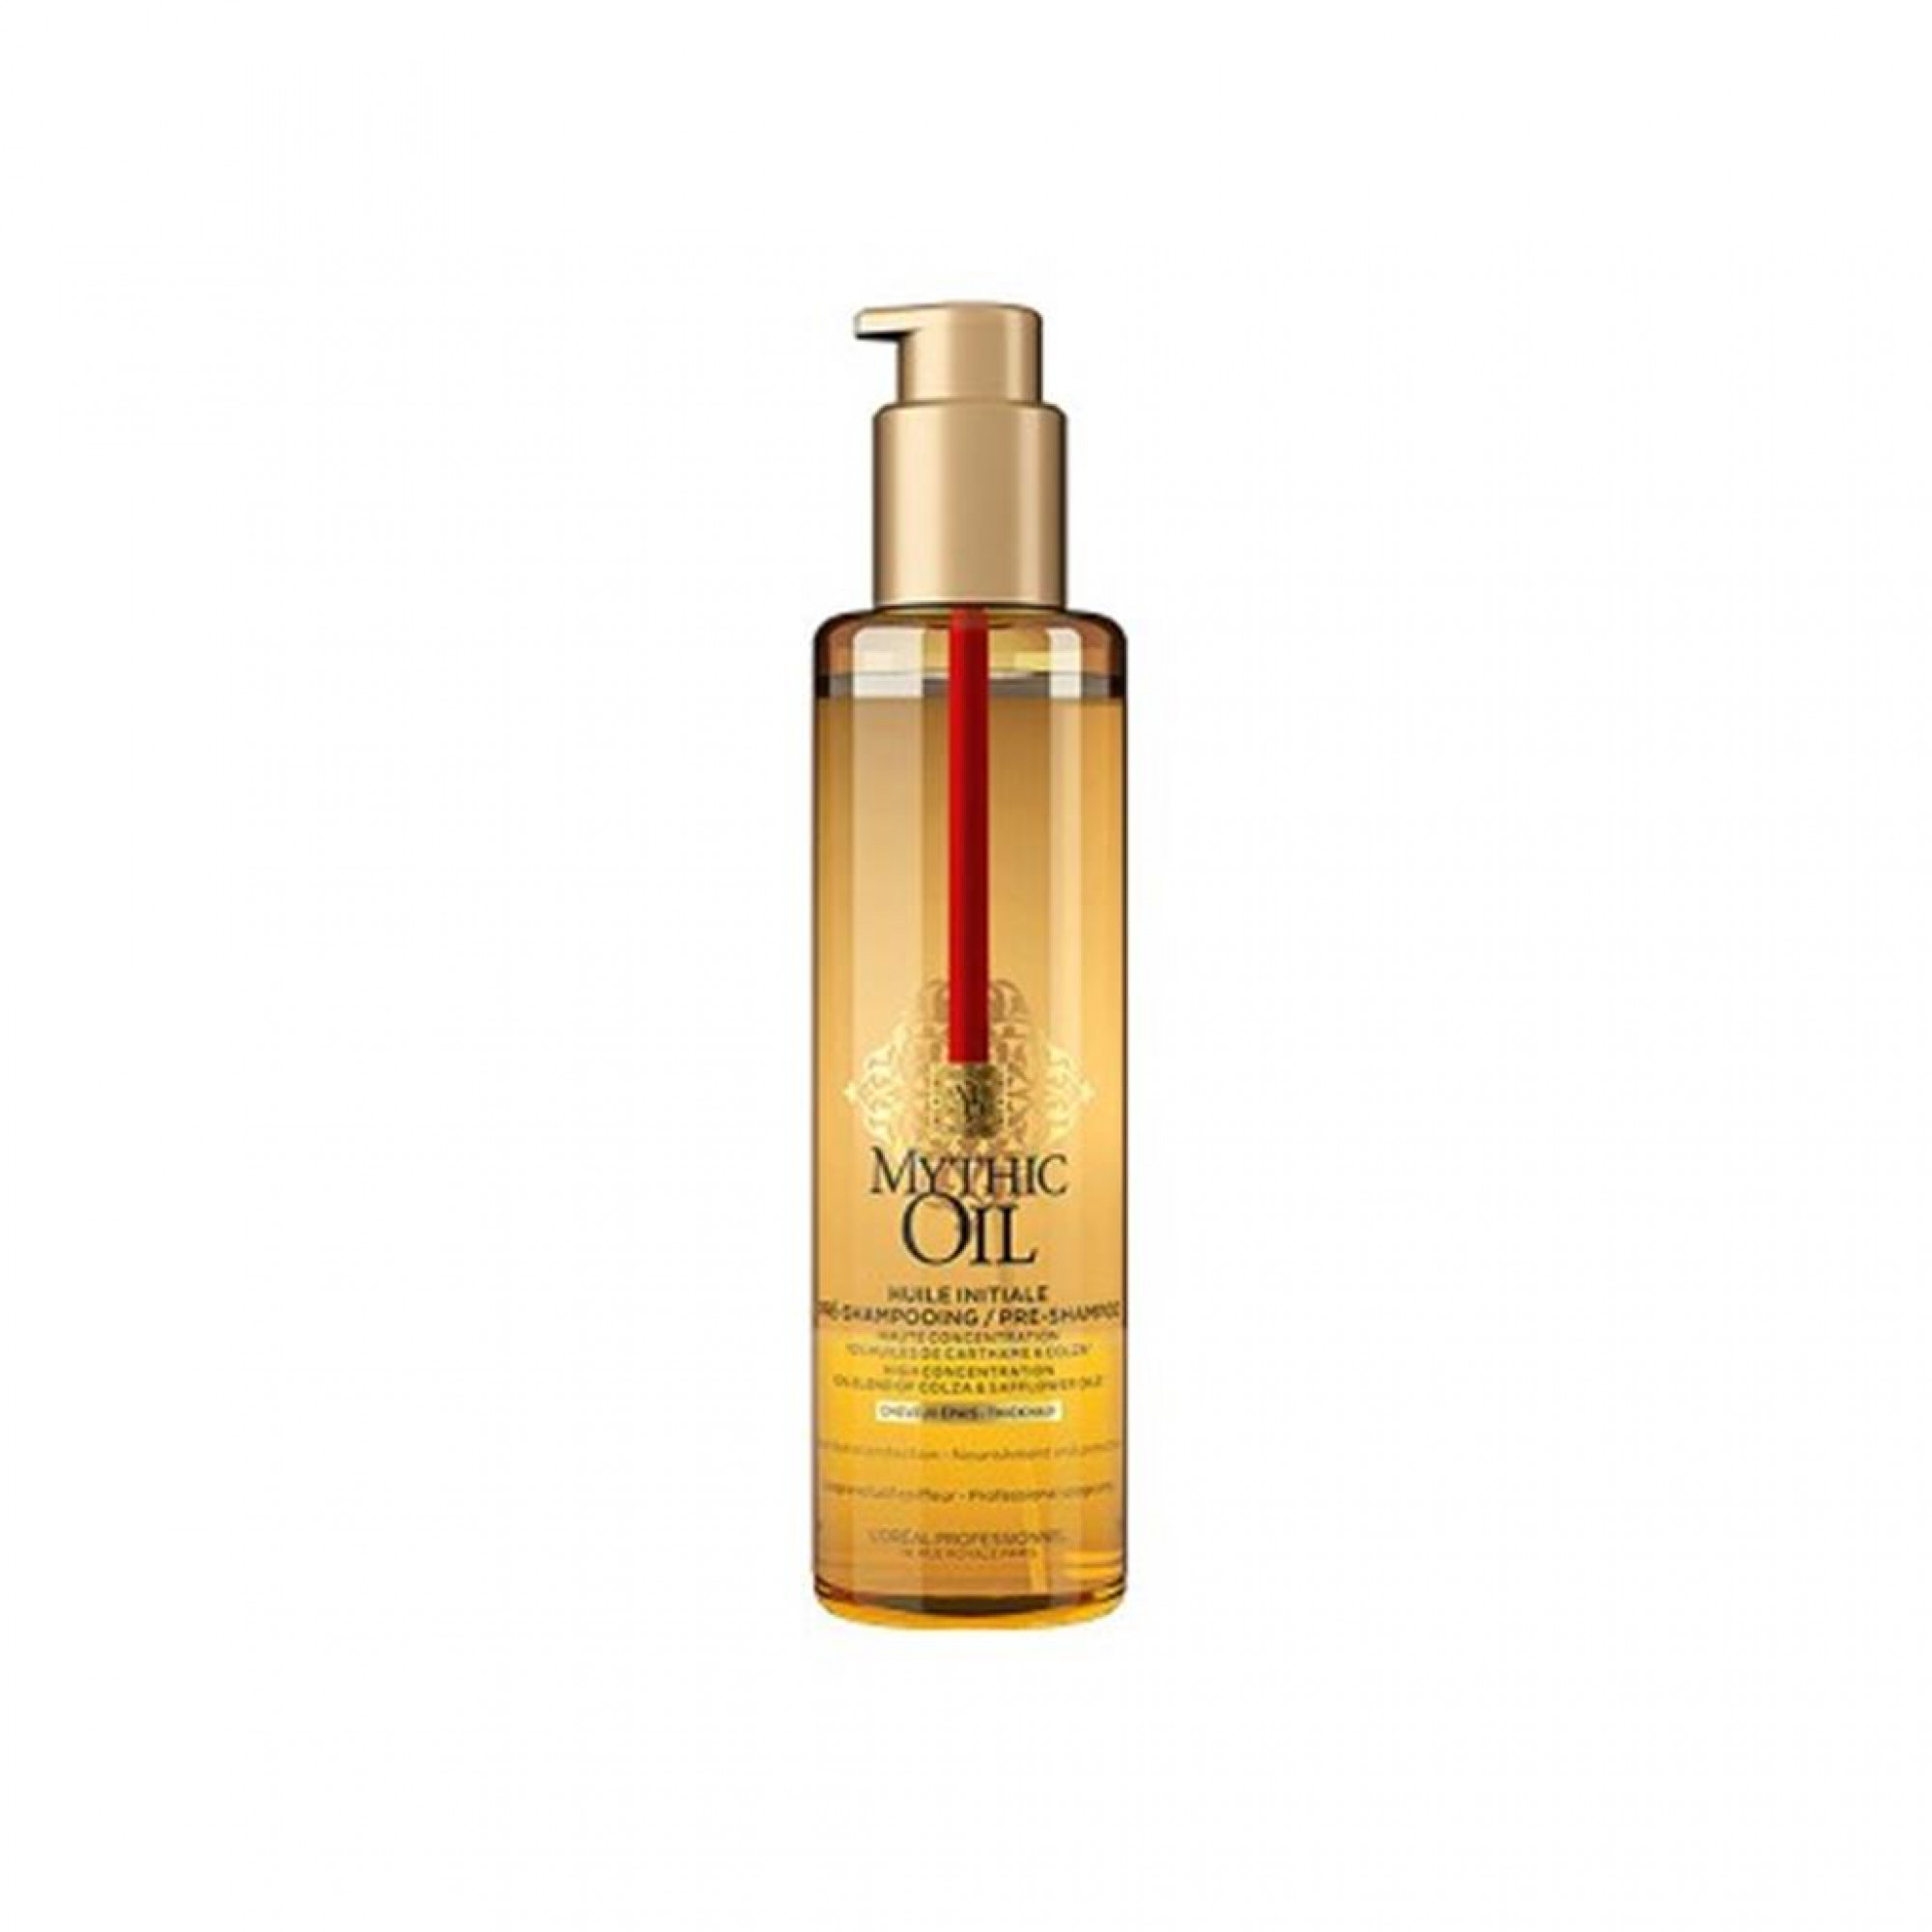 Масло l oreal professionnel. Mythic Oil Loreal. Митик оил масло для волос лореаль. Масло для волос Loreal Mythic Oil. Лореаль для волос Mythic Oil.